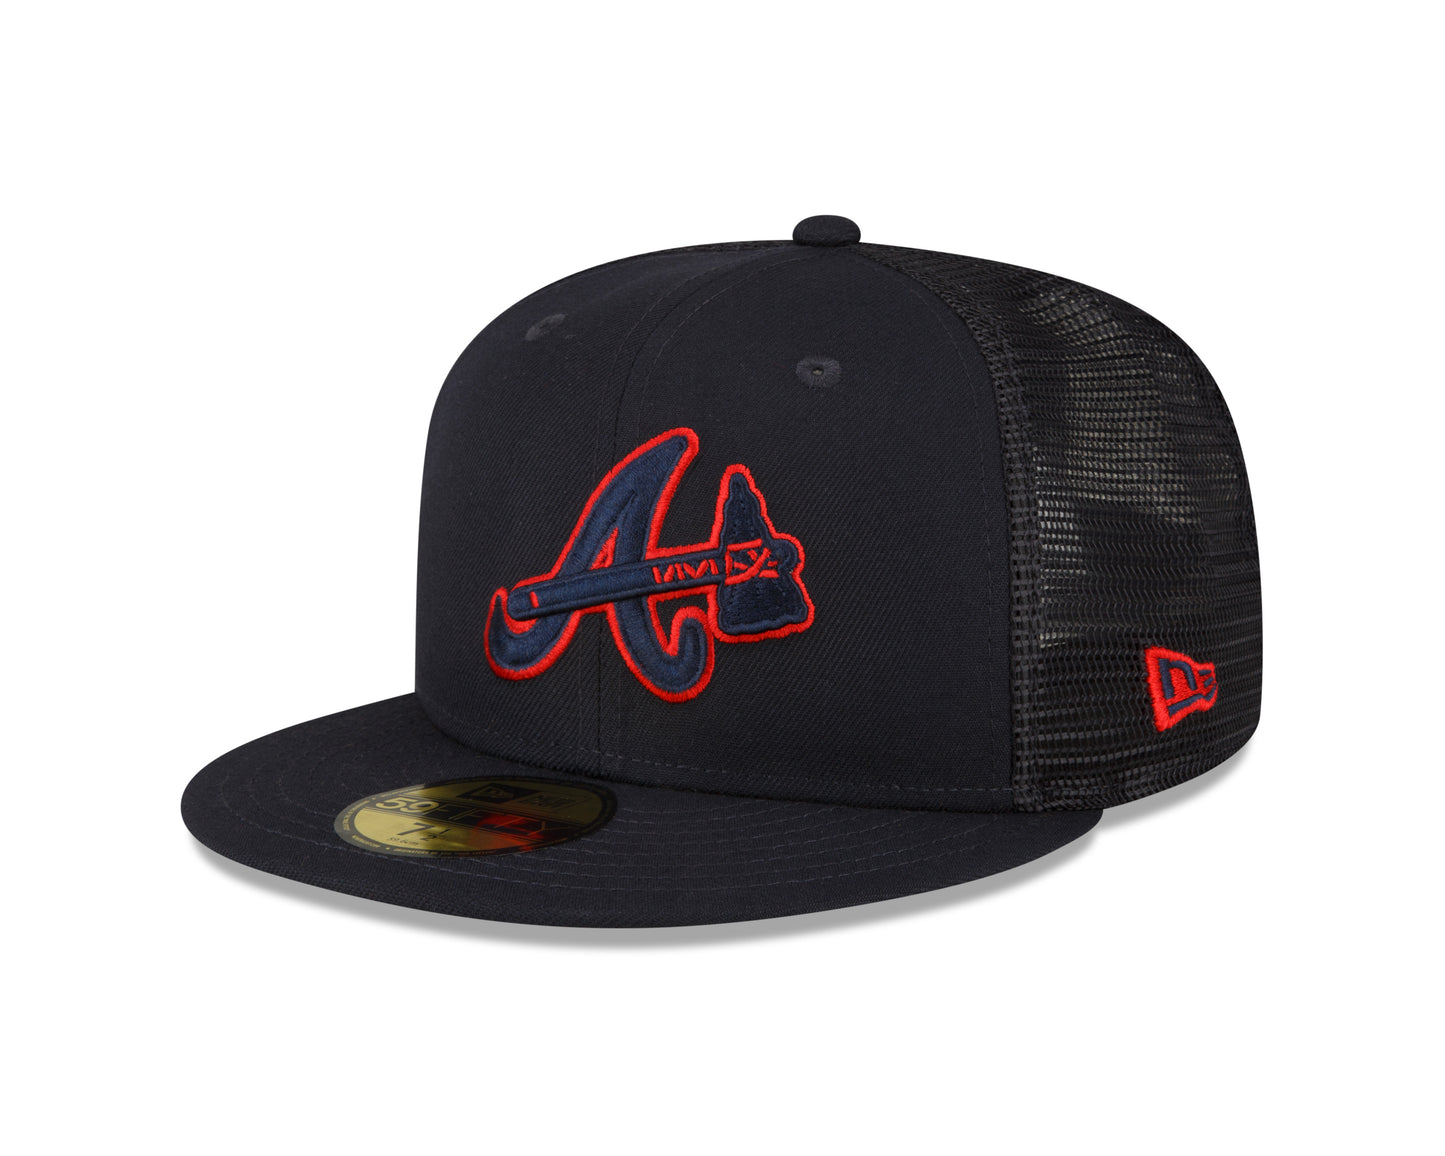 Atlanta Braves Spring Training 59fifty Mesh Fitted Hat